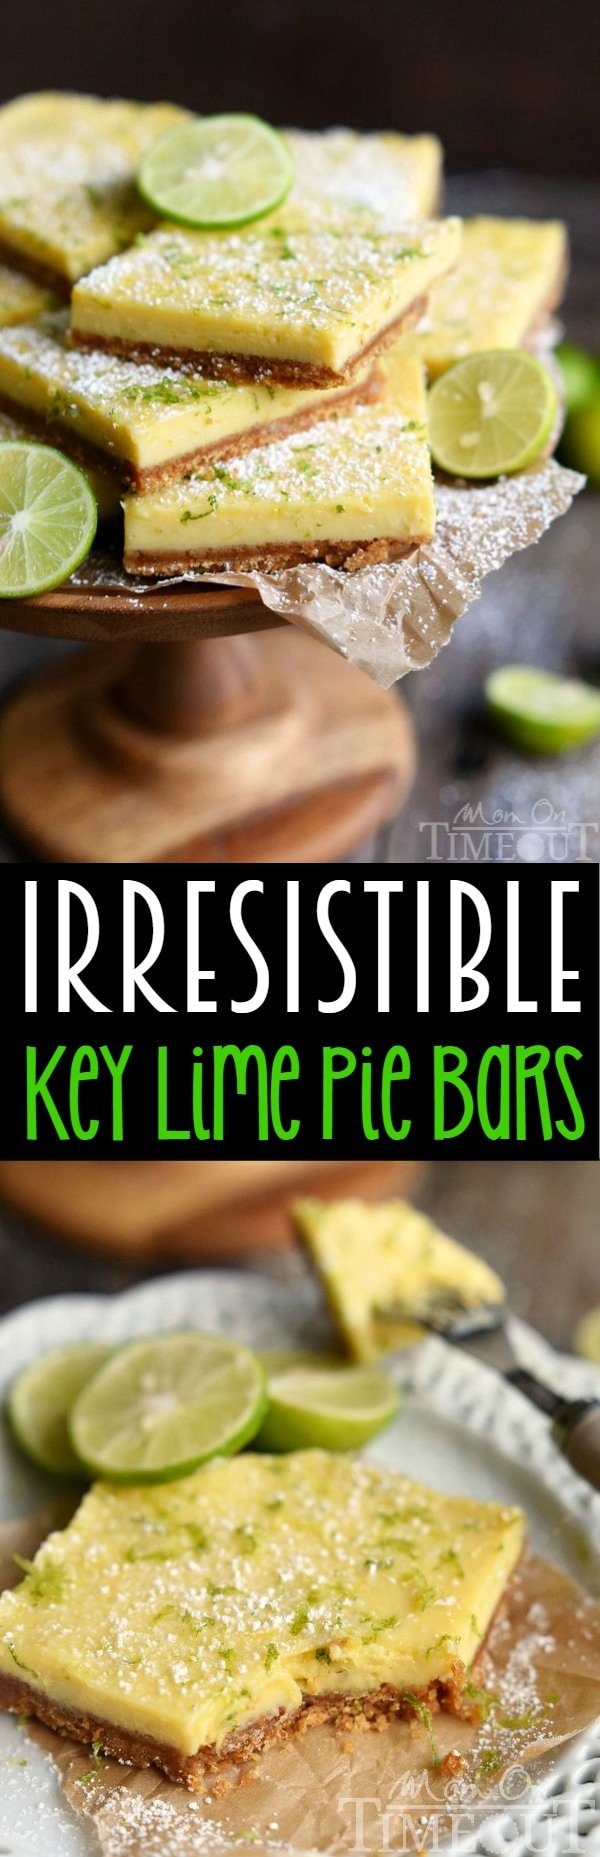 key-lime-pie-bars-collage